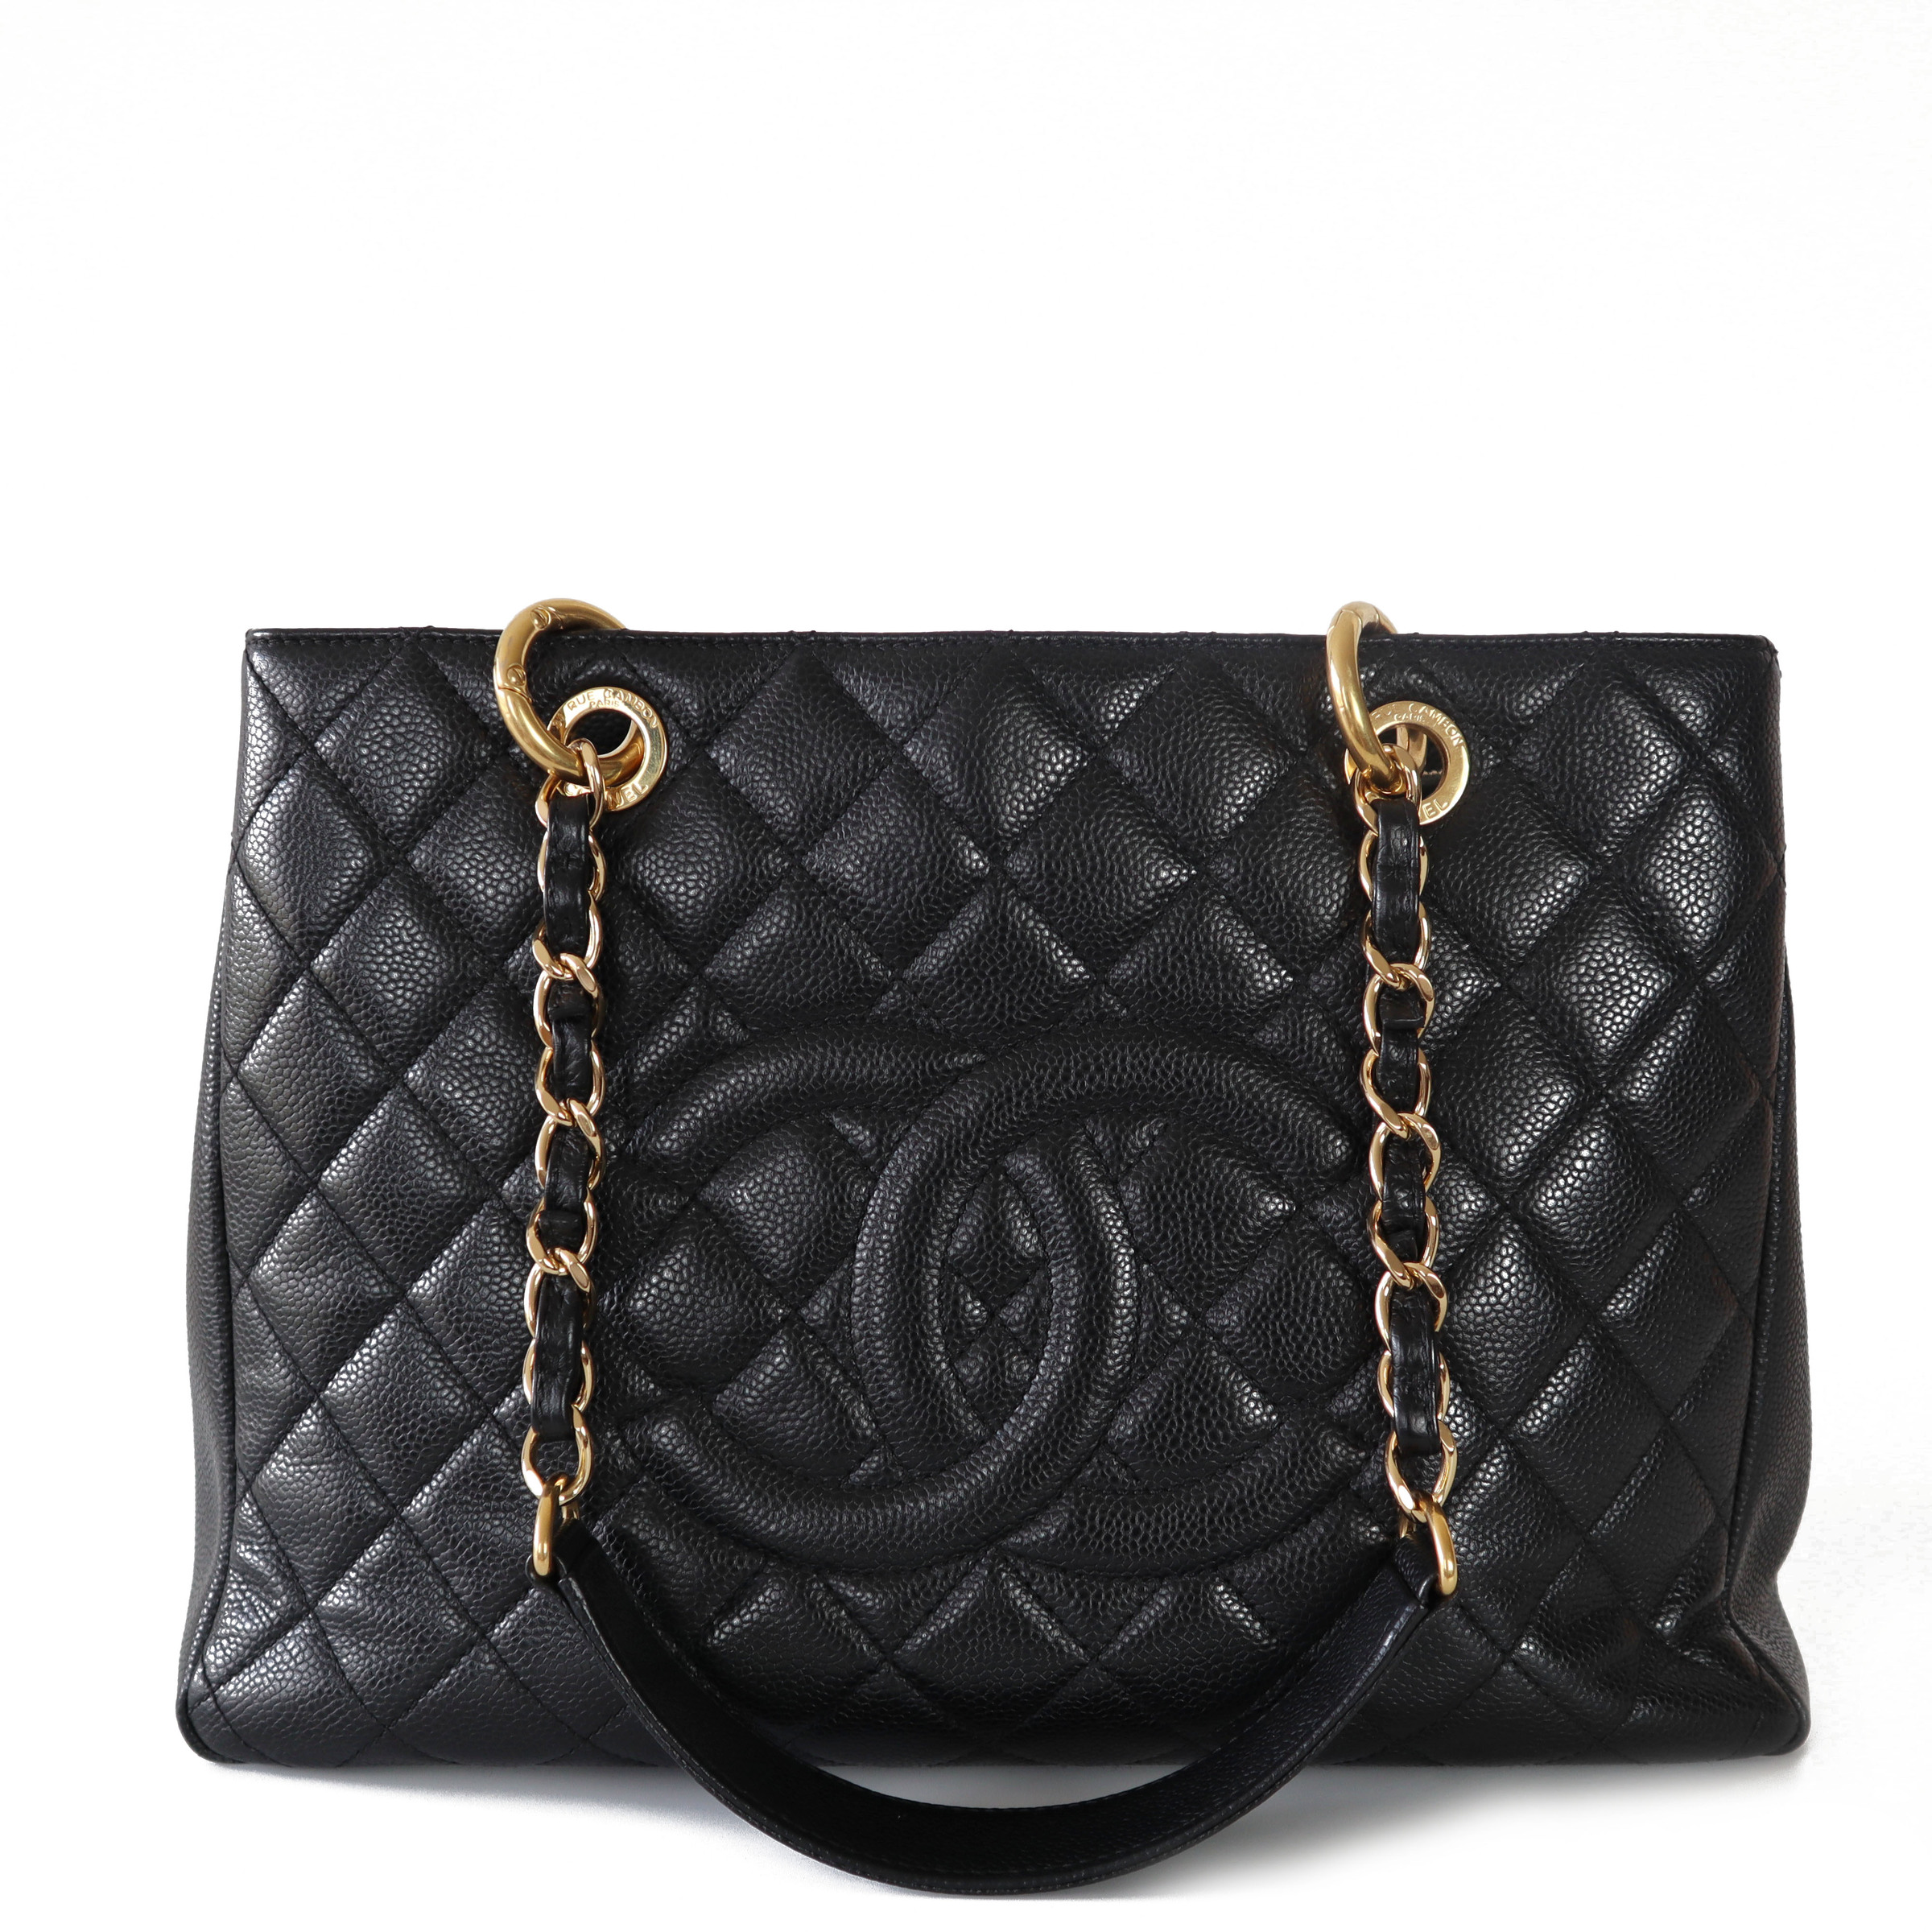 Chanel, Caviar Leather 'Grand Shopping Tote' Bag, 2014-2015